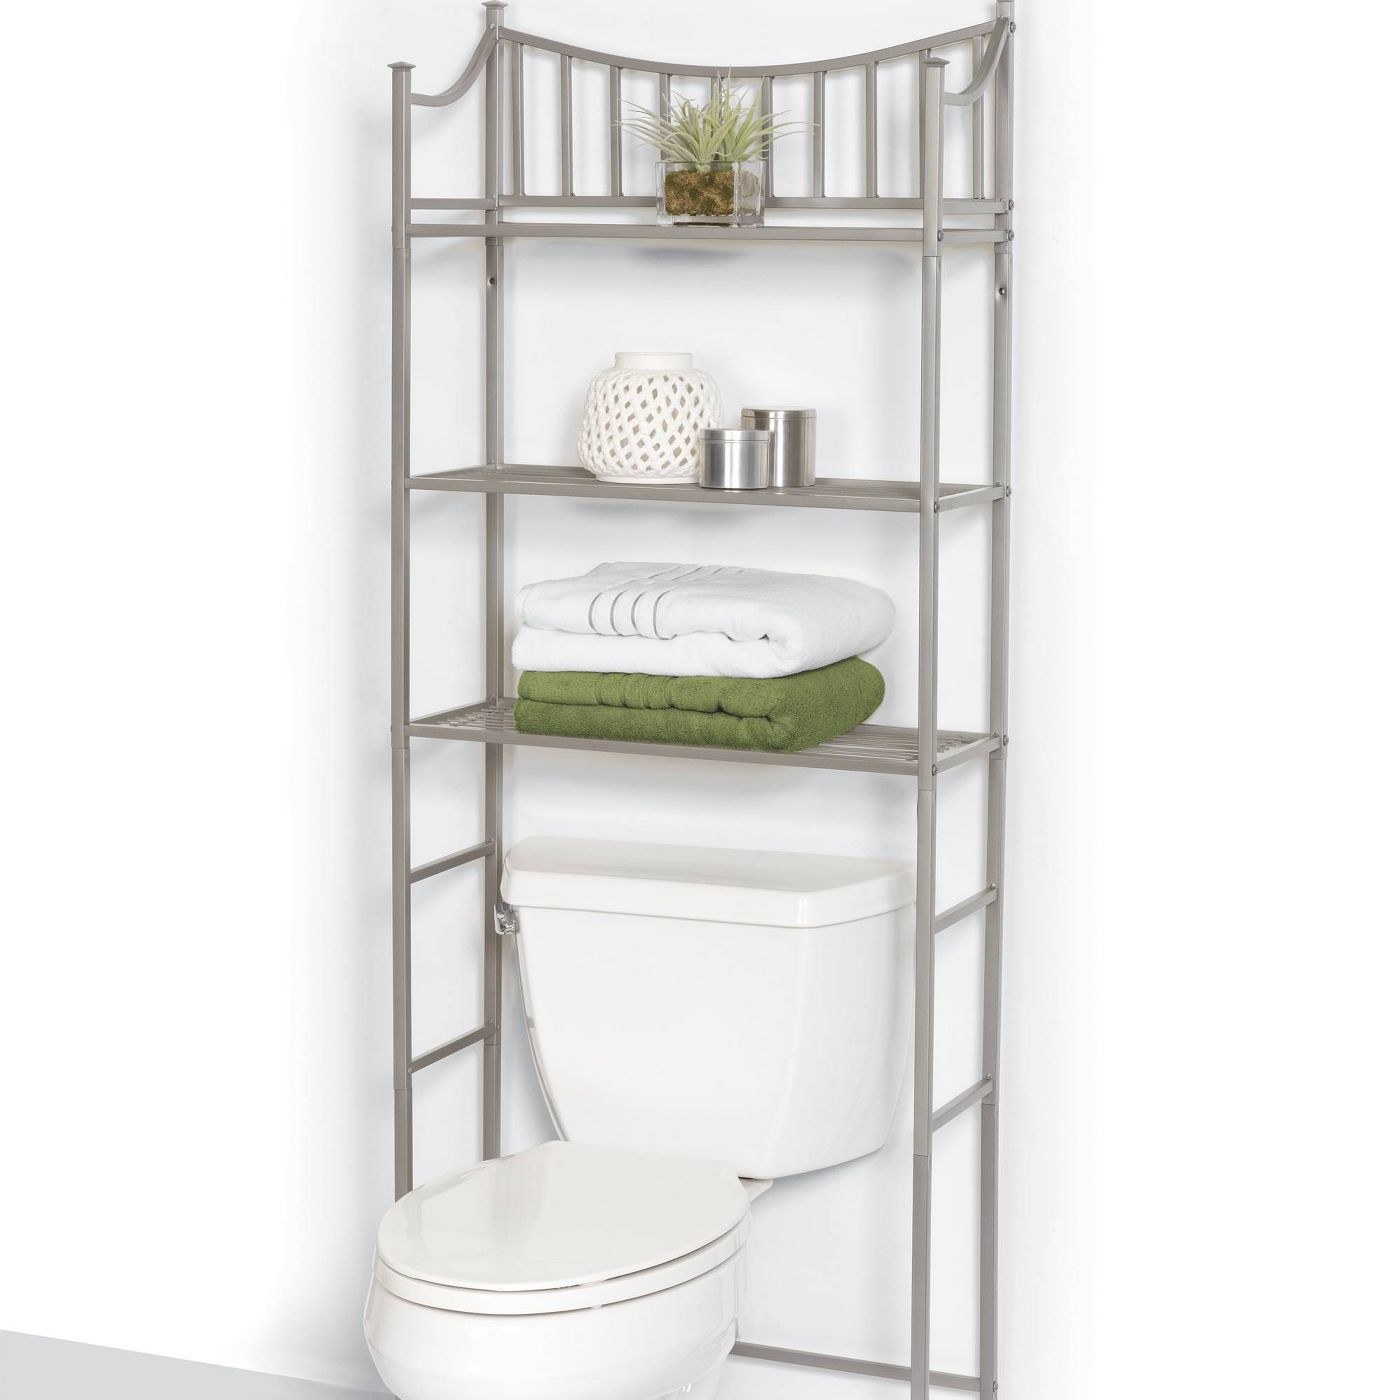 Over-the-toilet shelving space